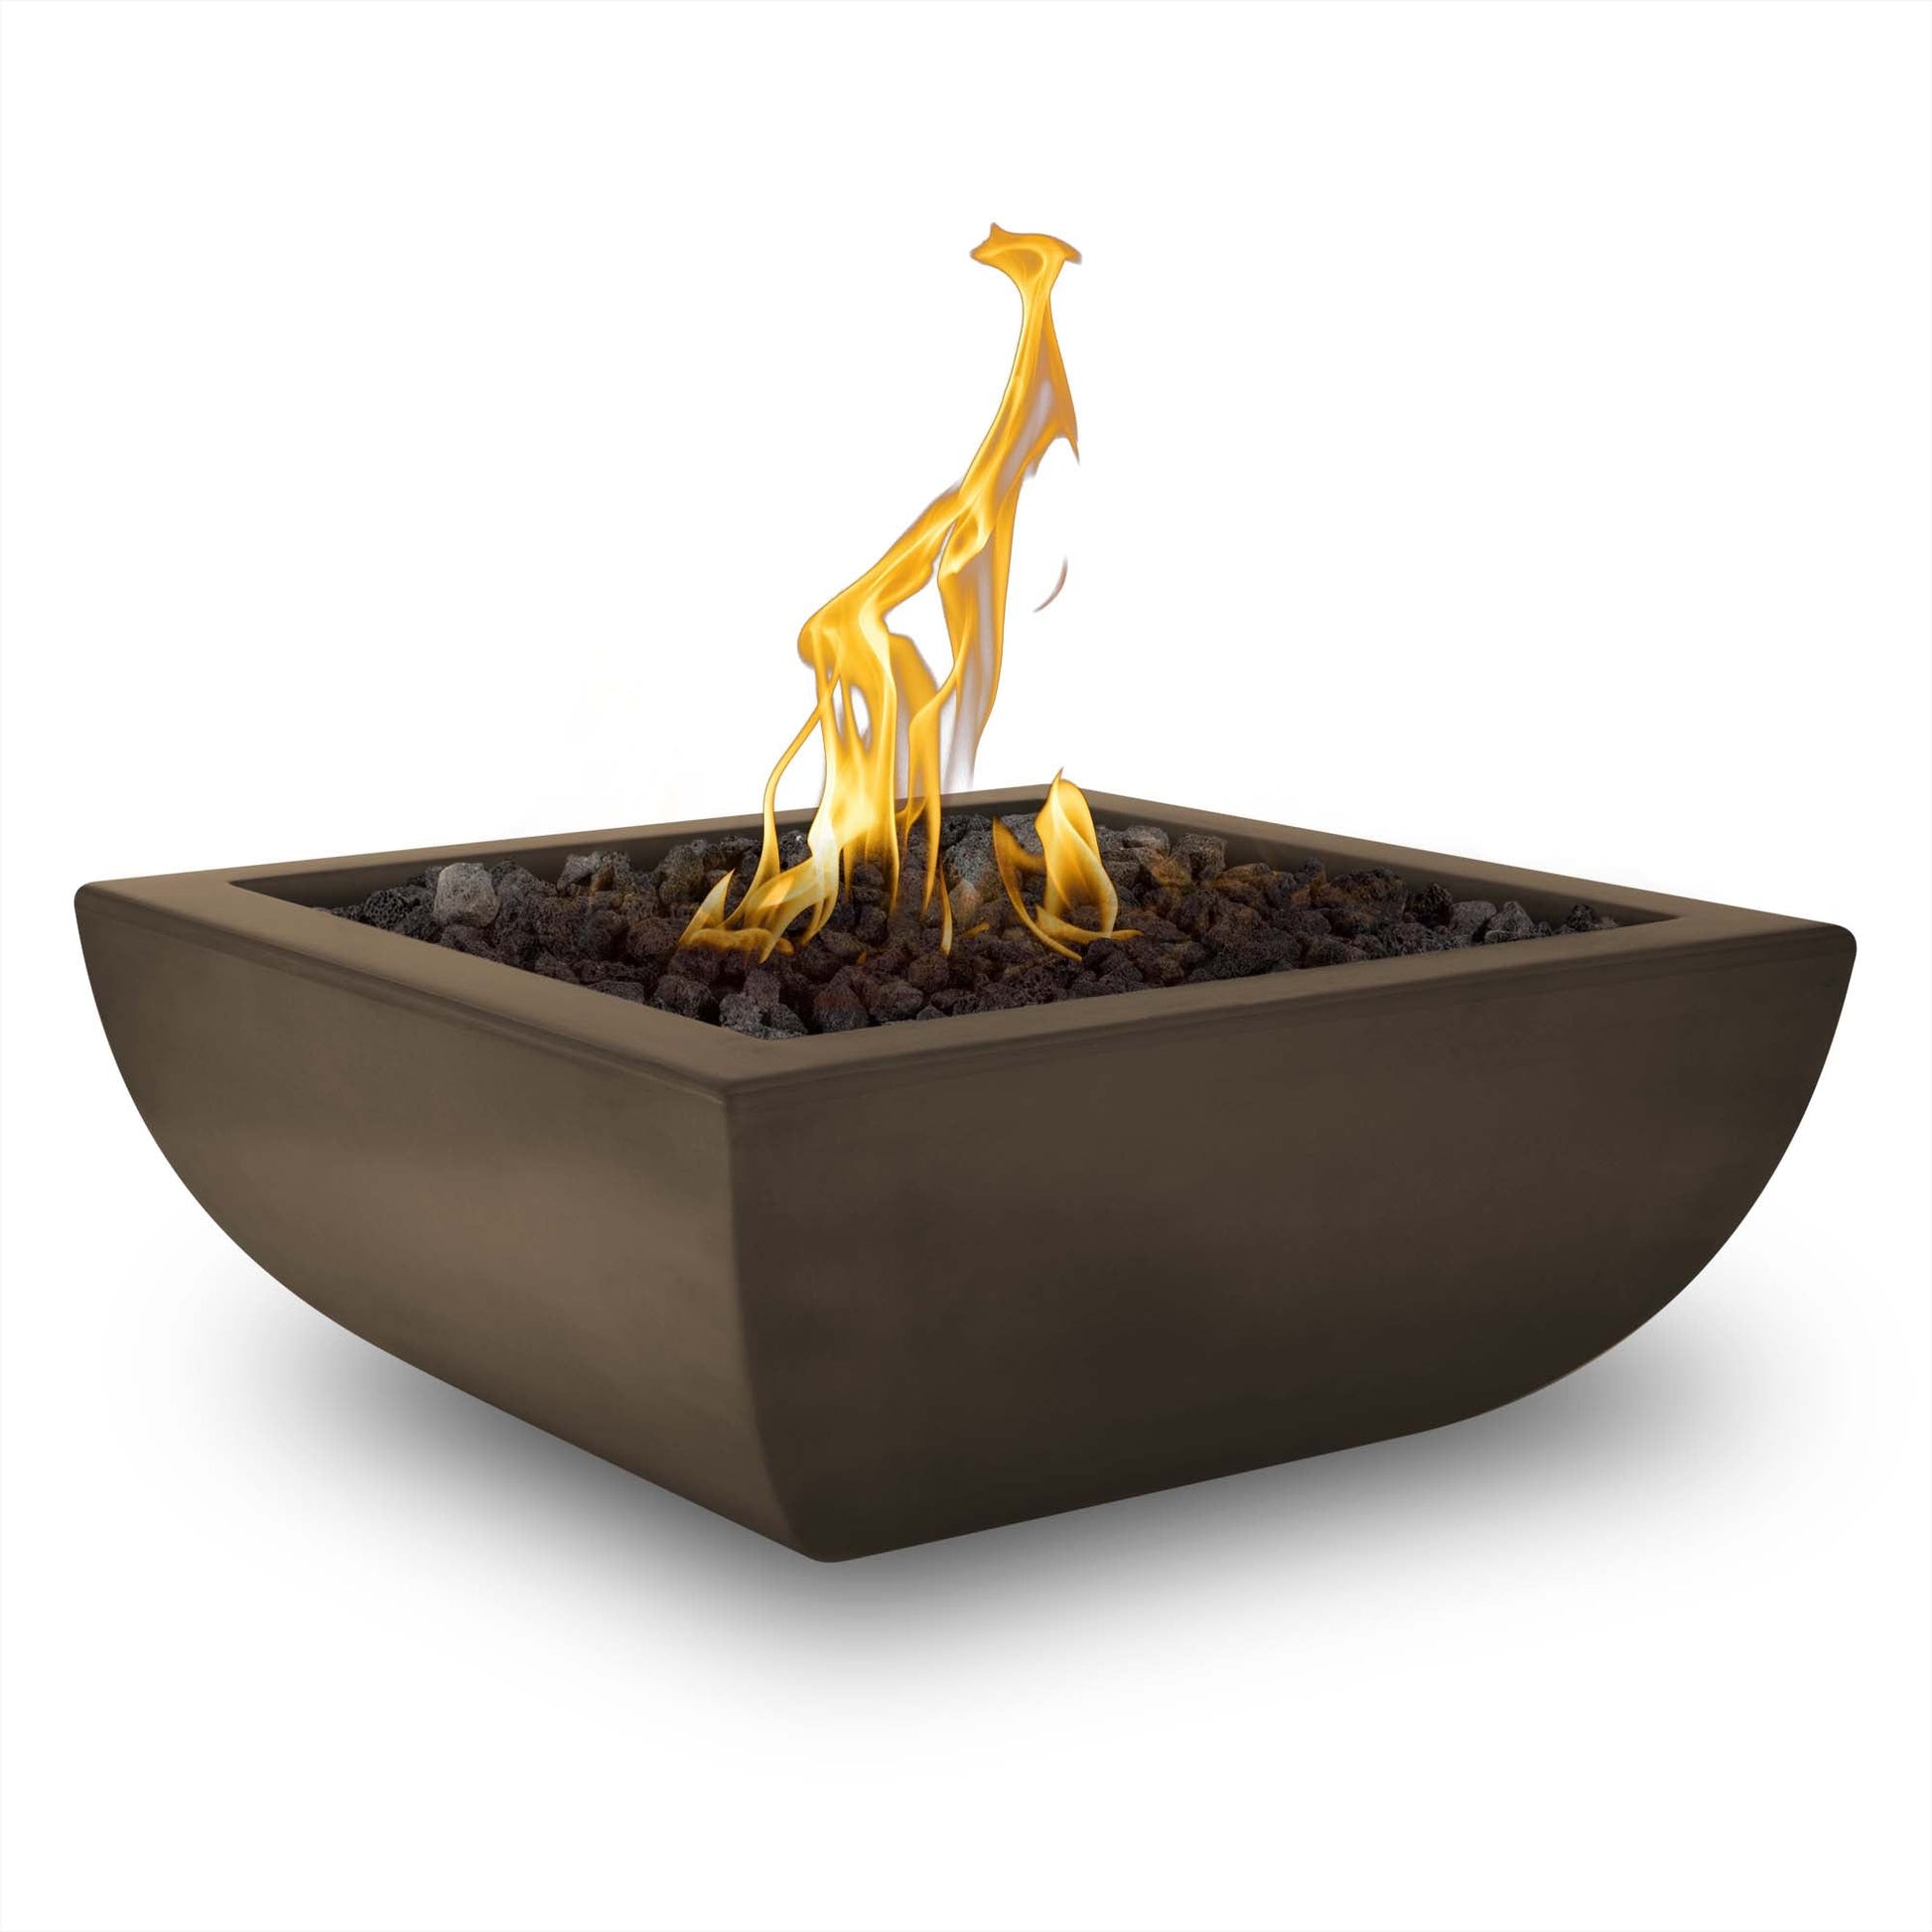 The Outdoor Plus Square Avalon 24" Natural Gray GFRC Concrete Liquid Propane Fire Bowl with Match Lit with Flame Sense Ignition